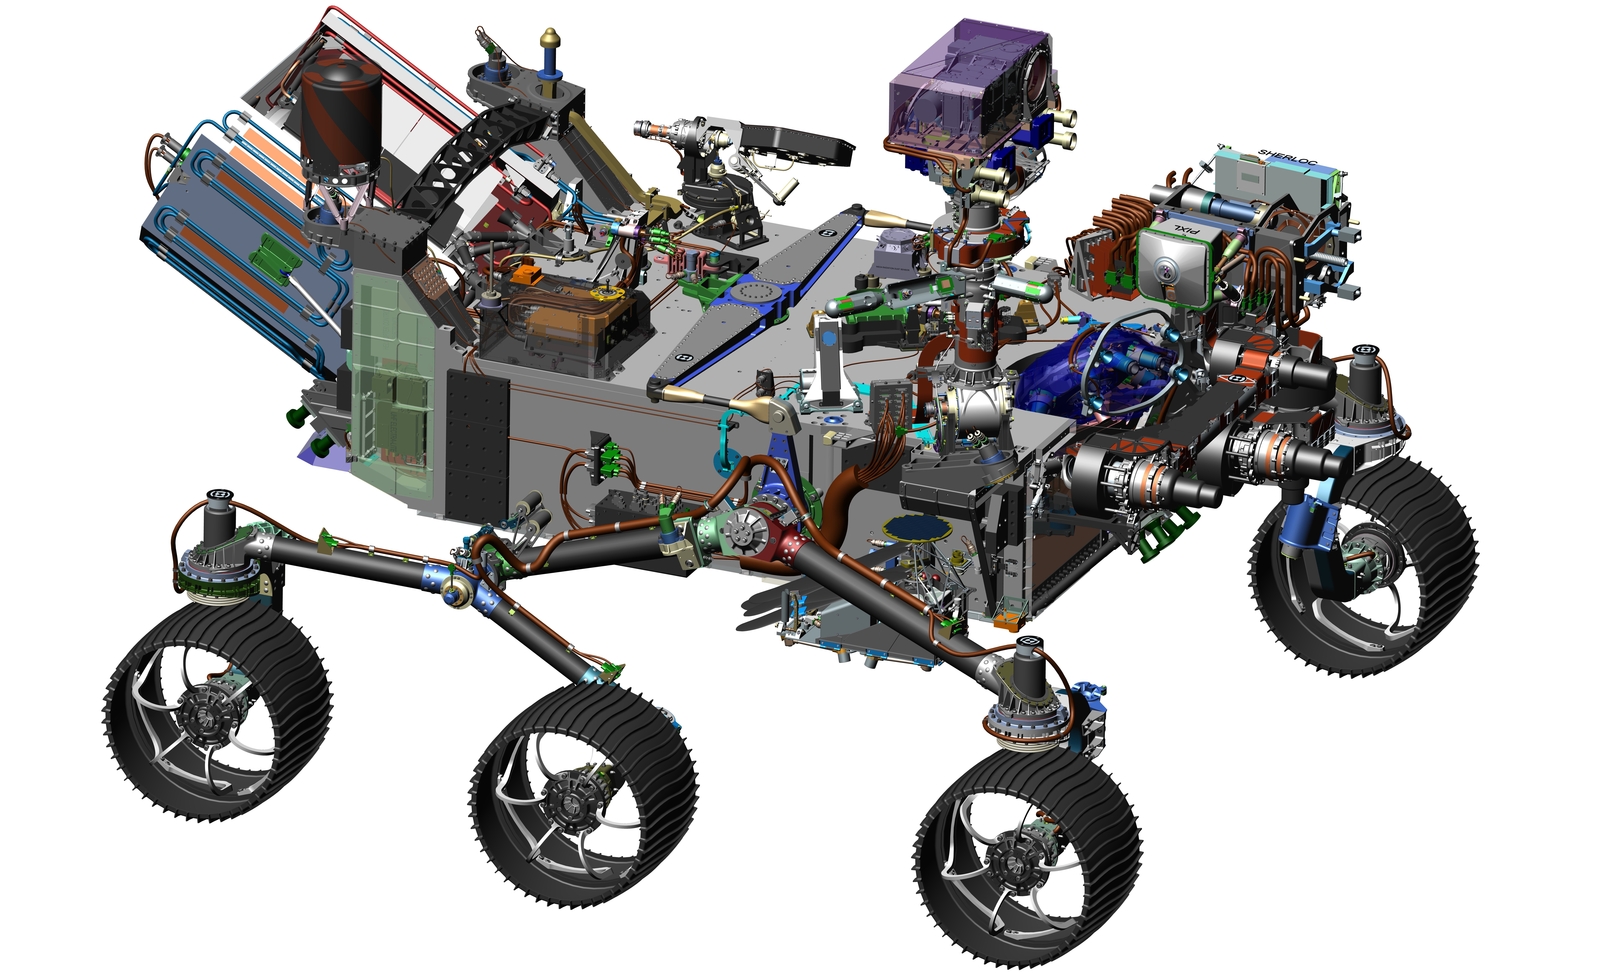 The design of NASA's Mars 2020 rover leverages many successful features of the agency's Curiosity rover,